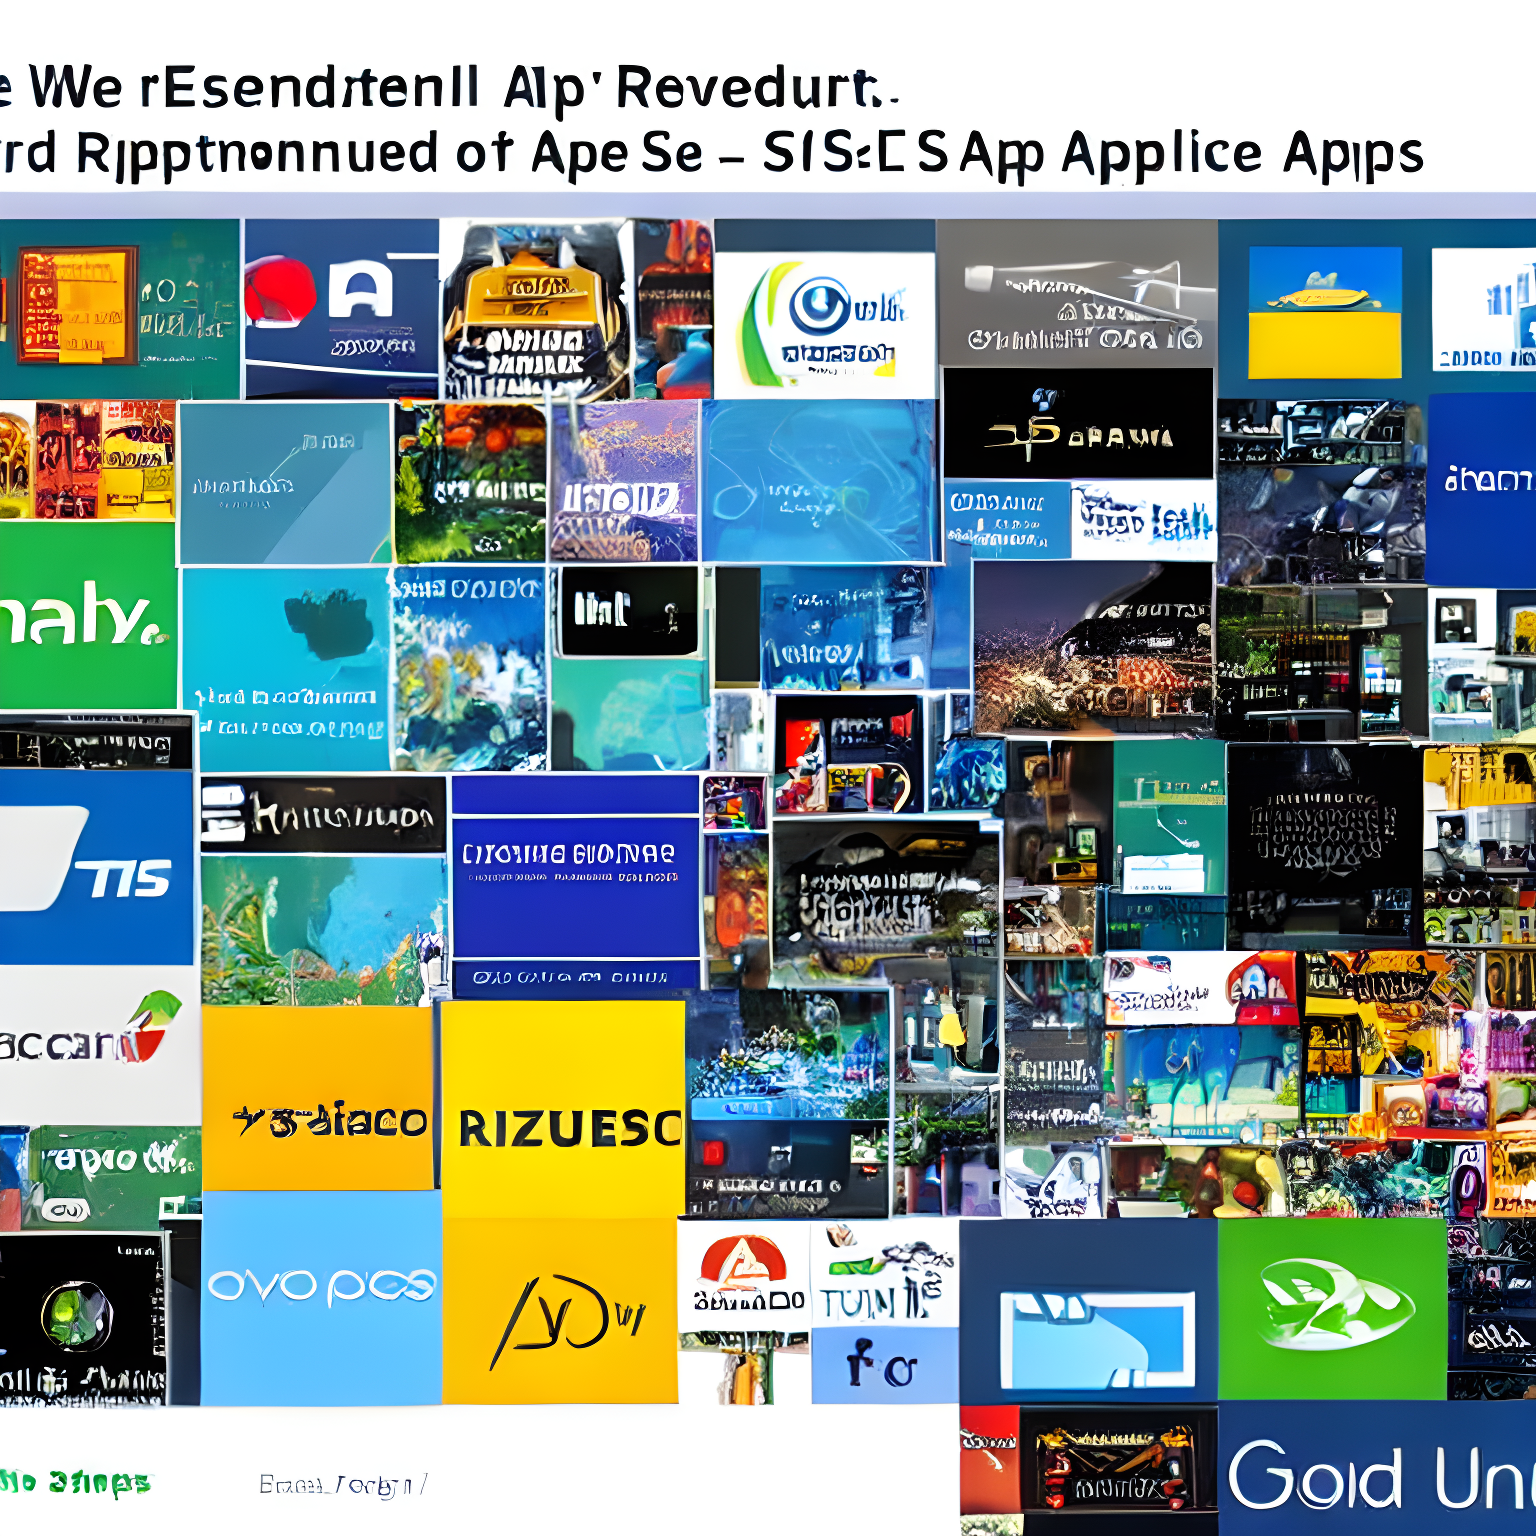 We reverse engineered 16k apps, here’s what we found